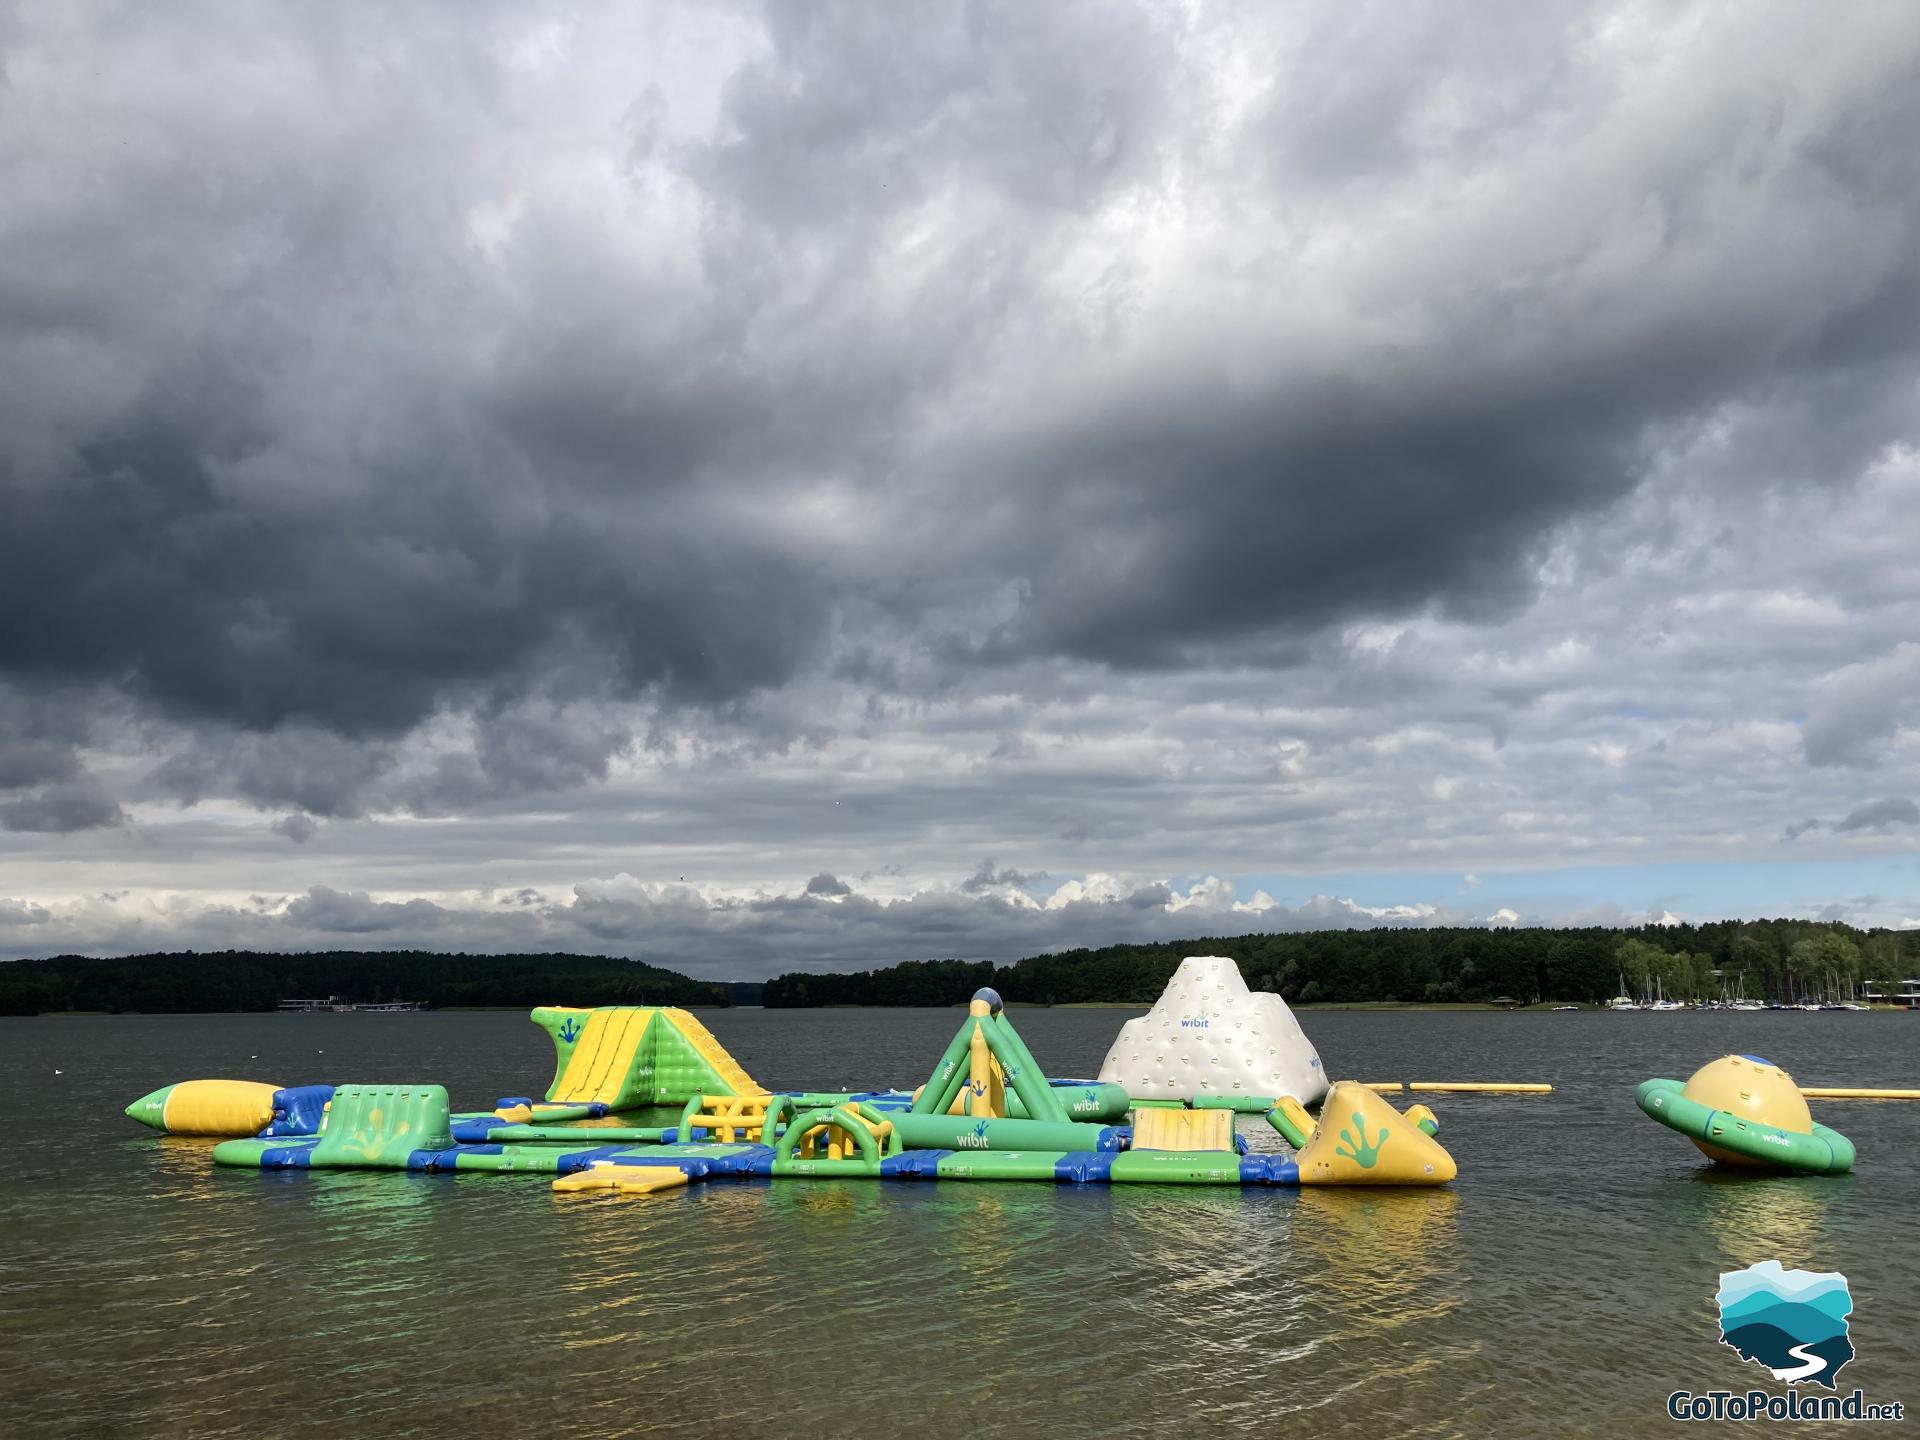 water inflatables on the lake